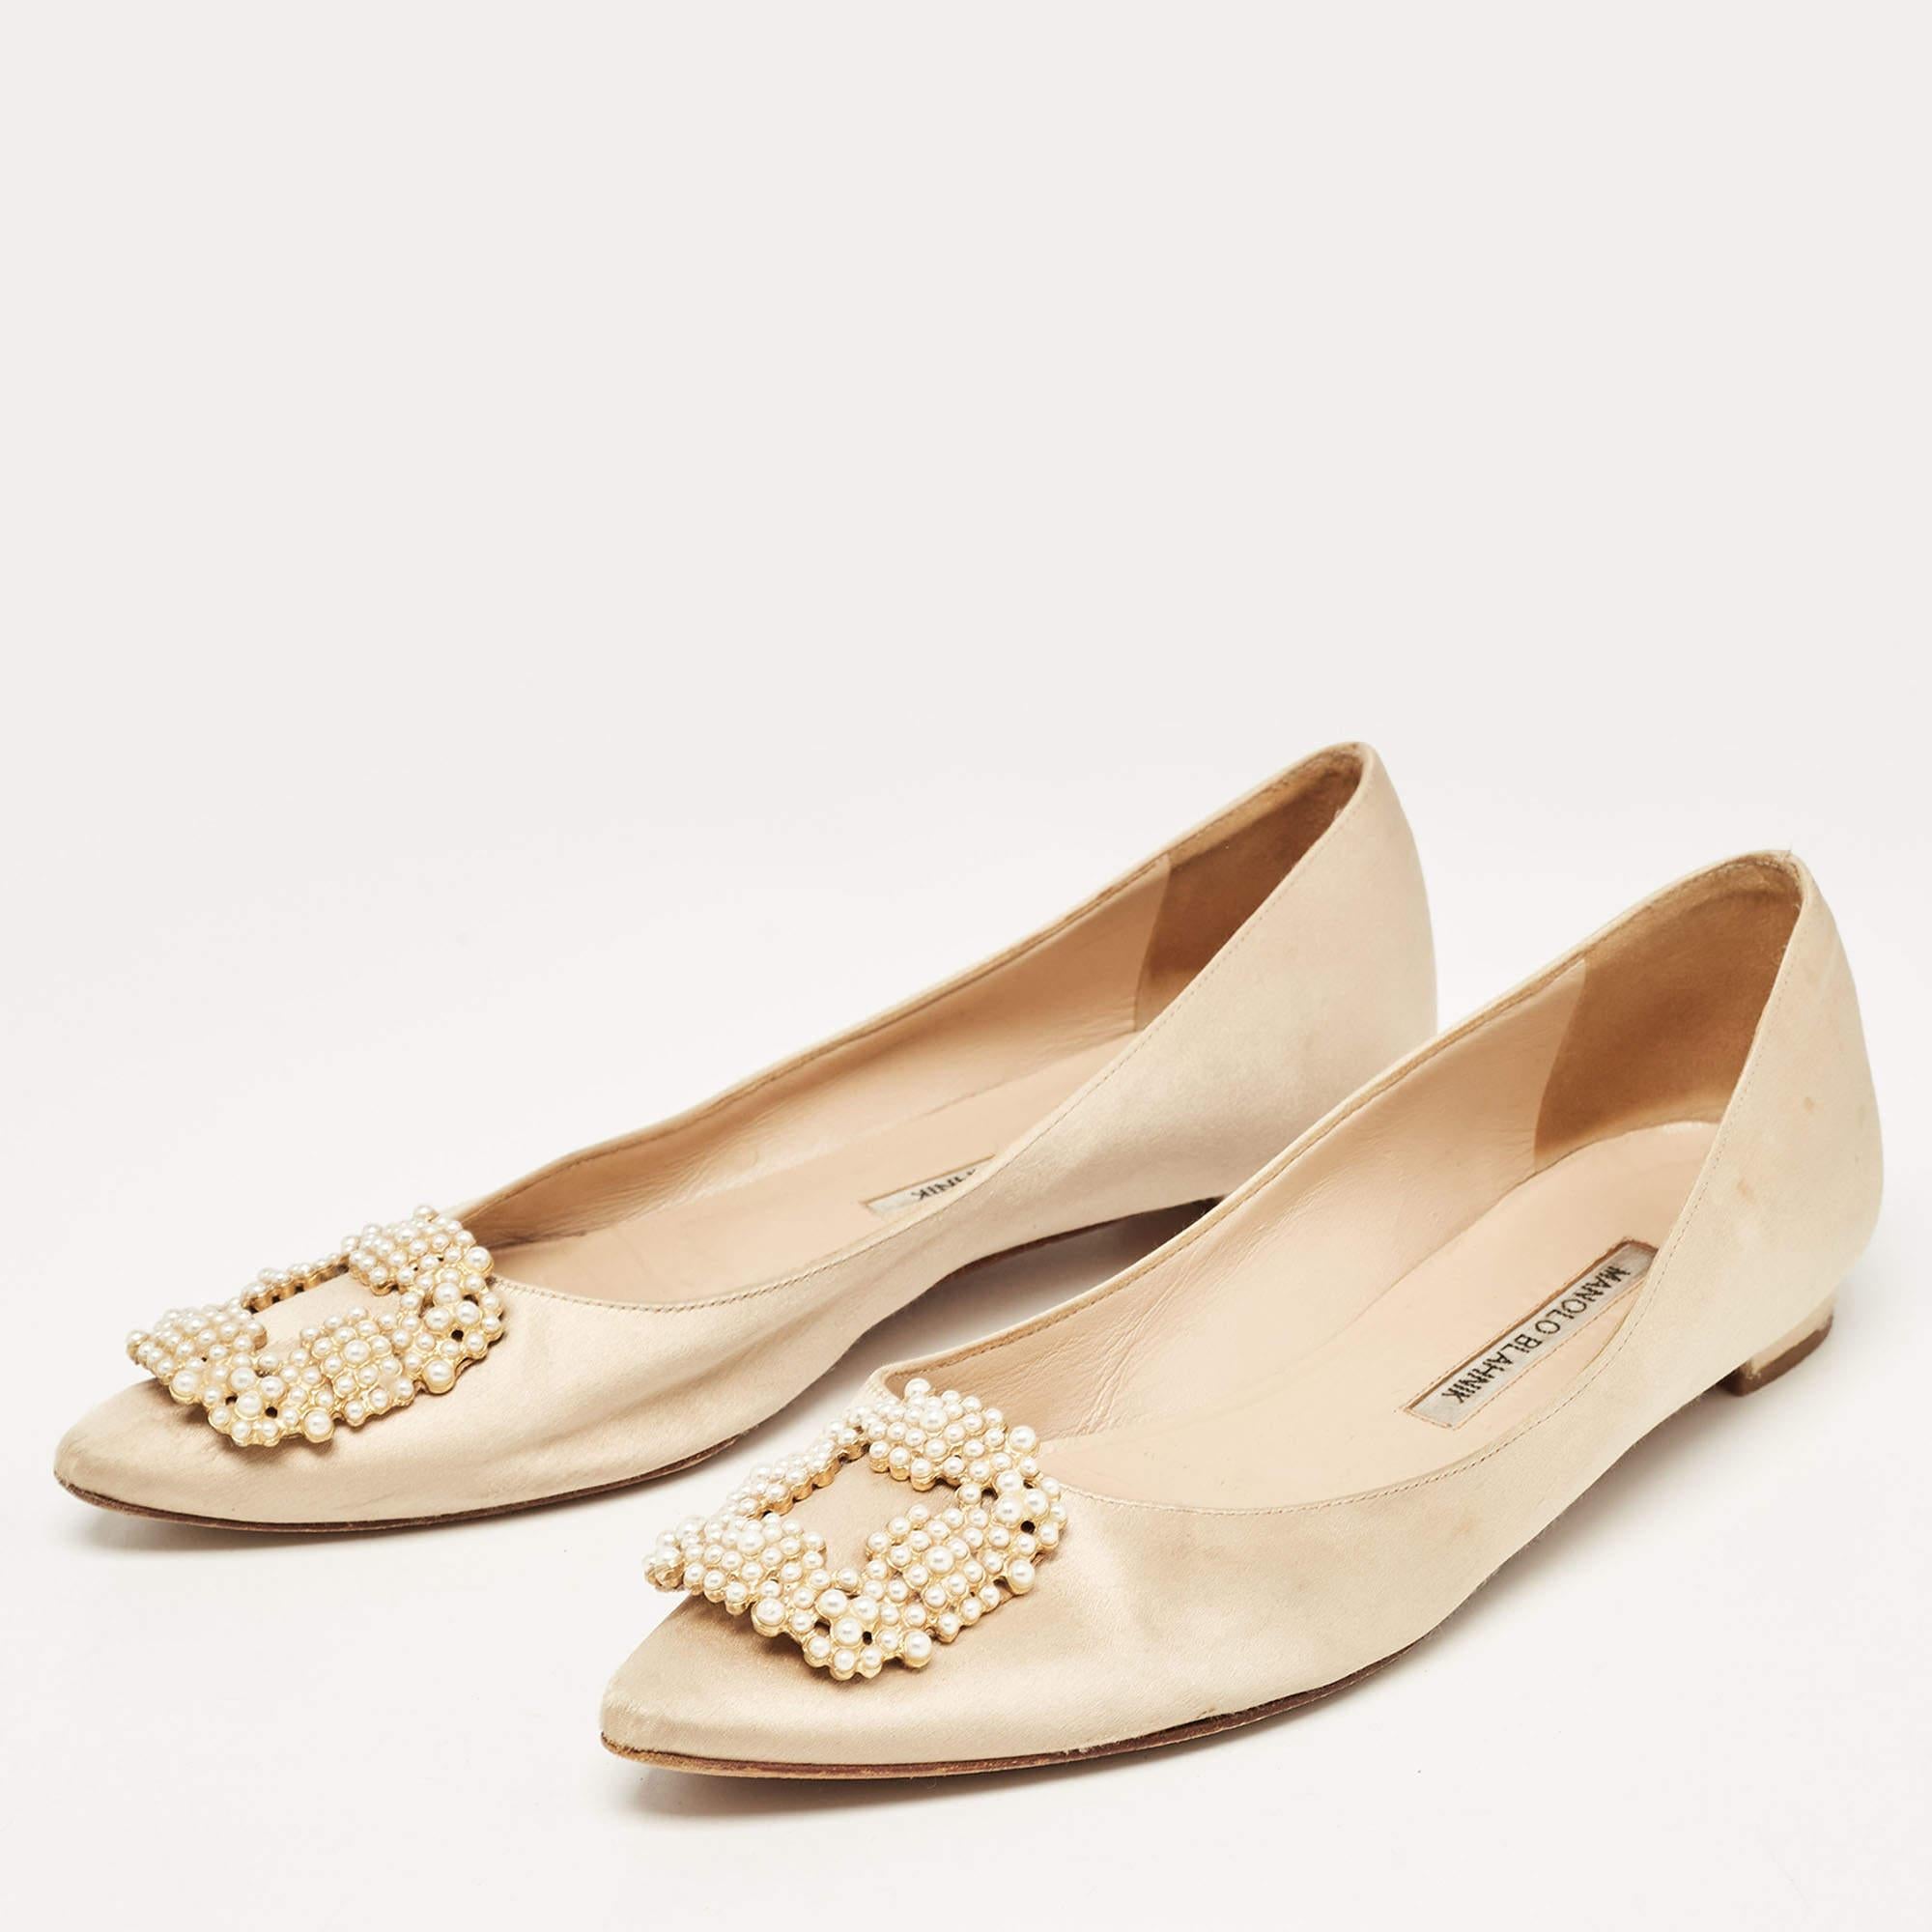 Step into sophistication and comfort with these Manolo Blahnik ballet flats for women. Exquisitely crafted, these versatile shoes blend timeless elegance with everyday ease, ensuring a stylish and relaxed stride.

